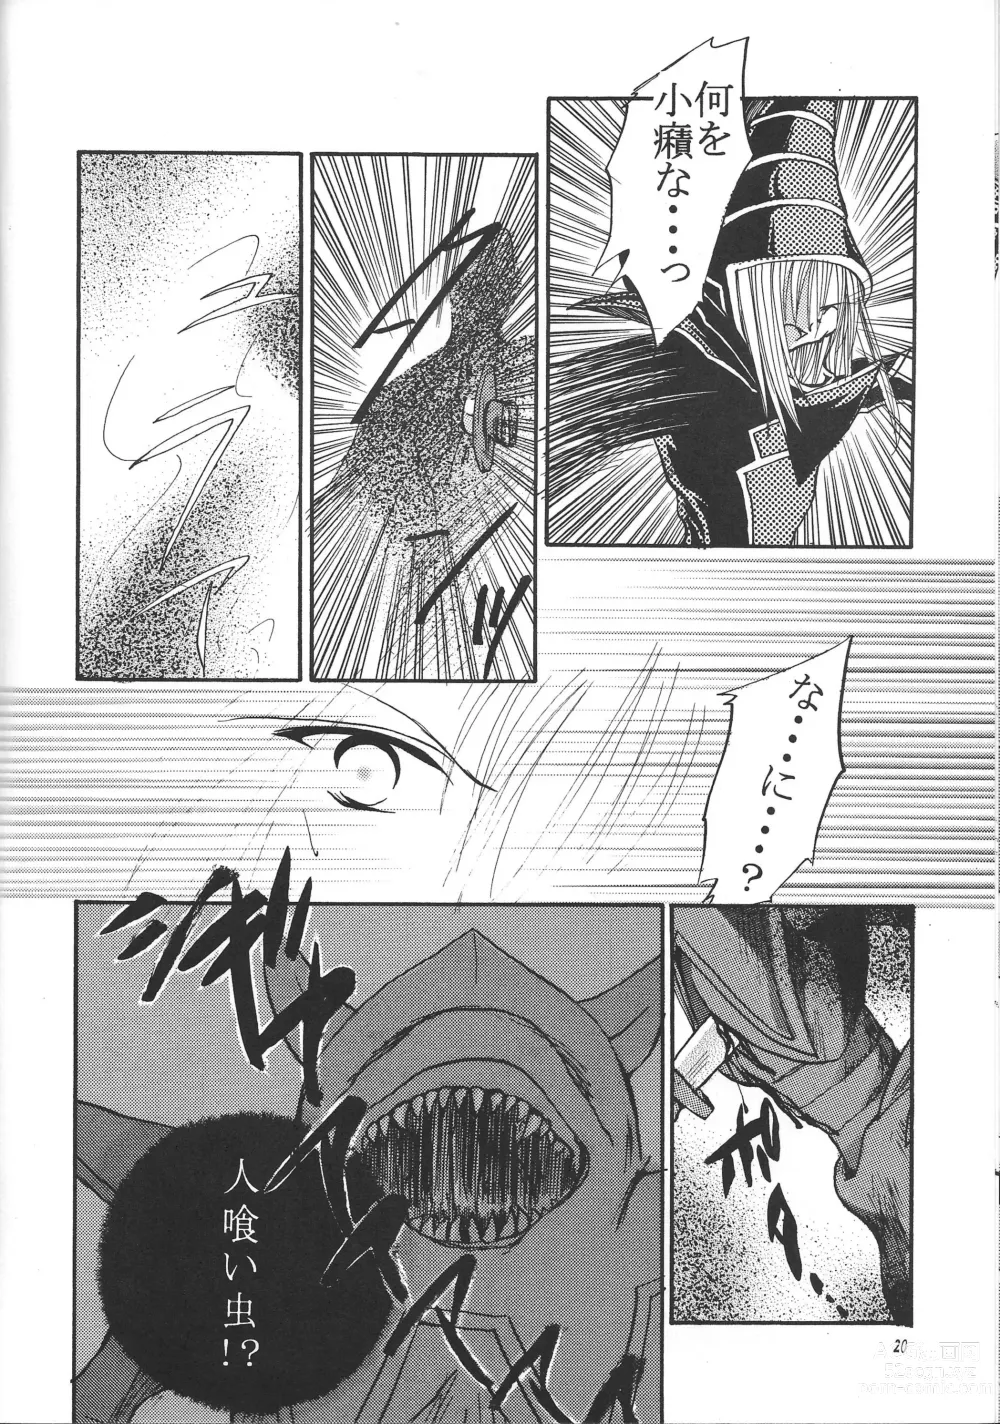 Page 19 of doujinshi pleasures of the moment